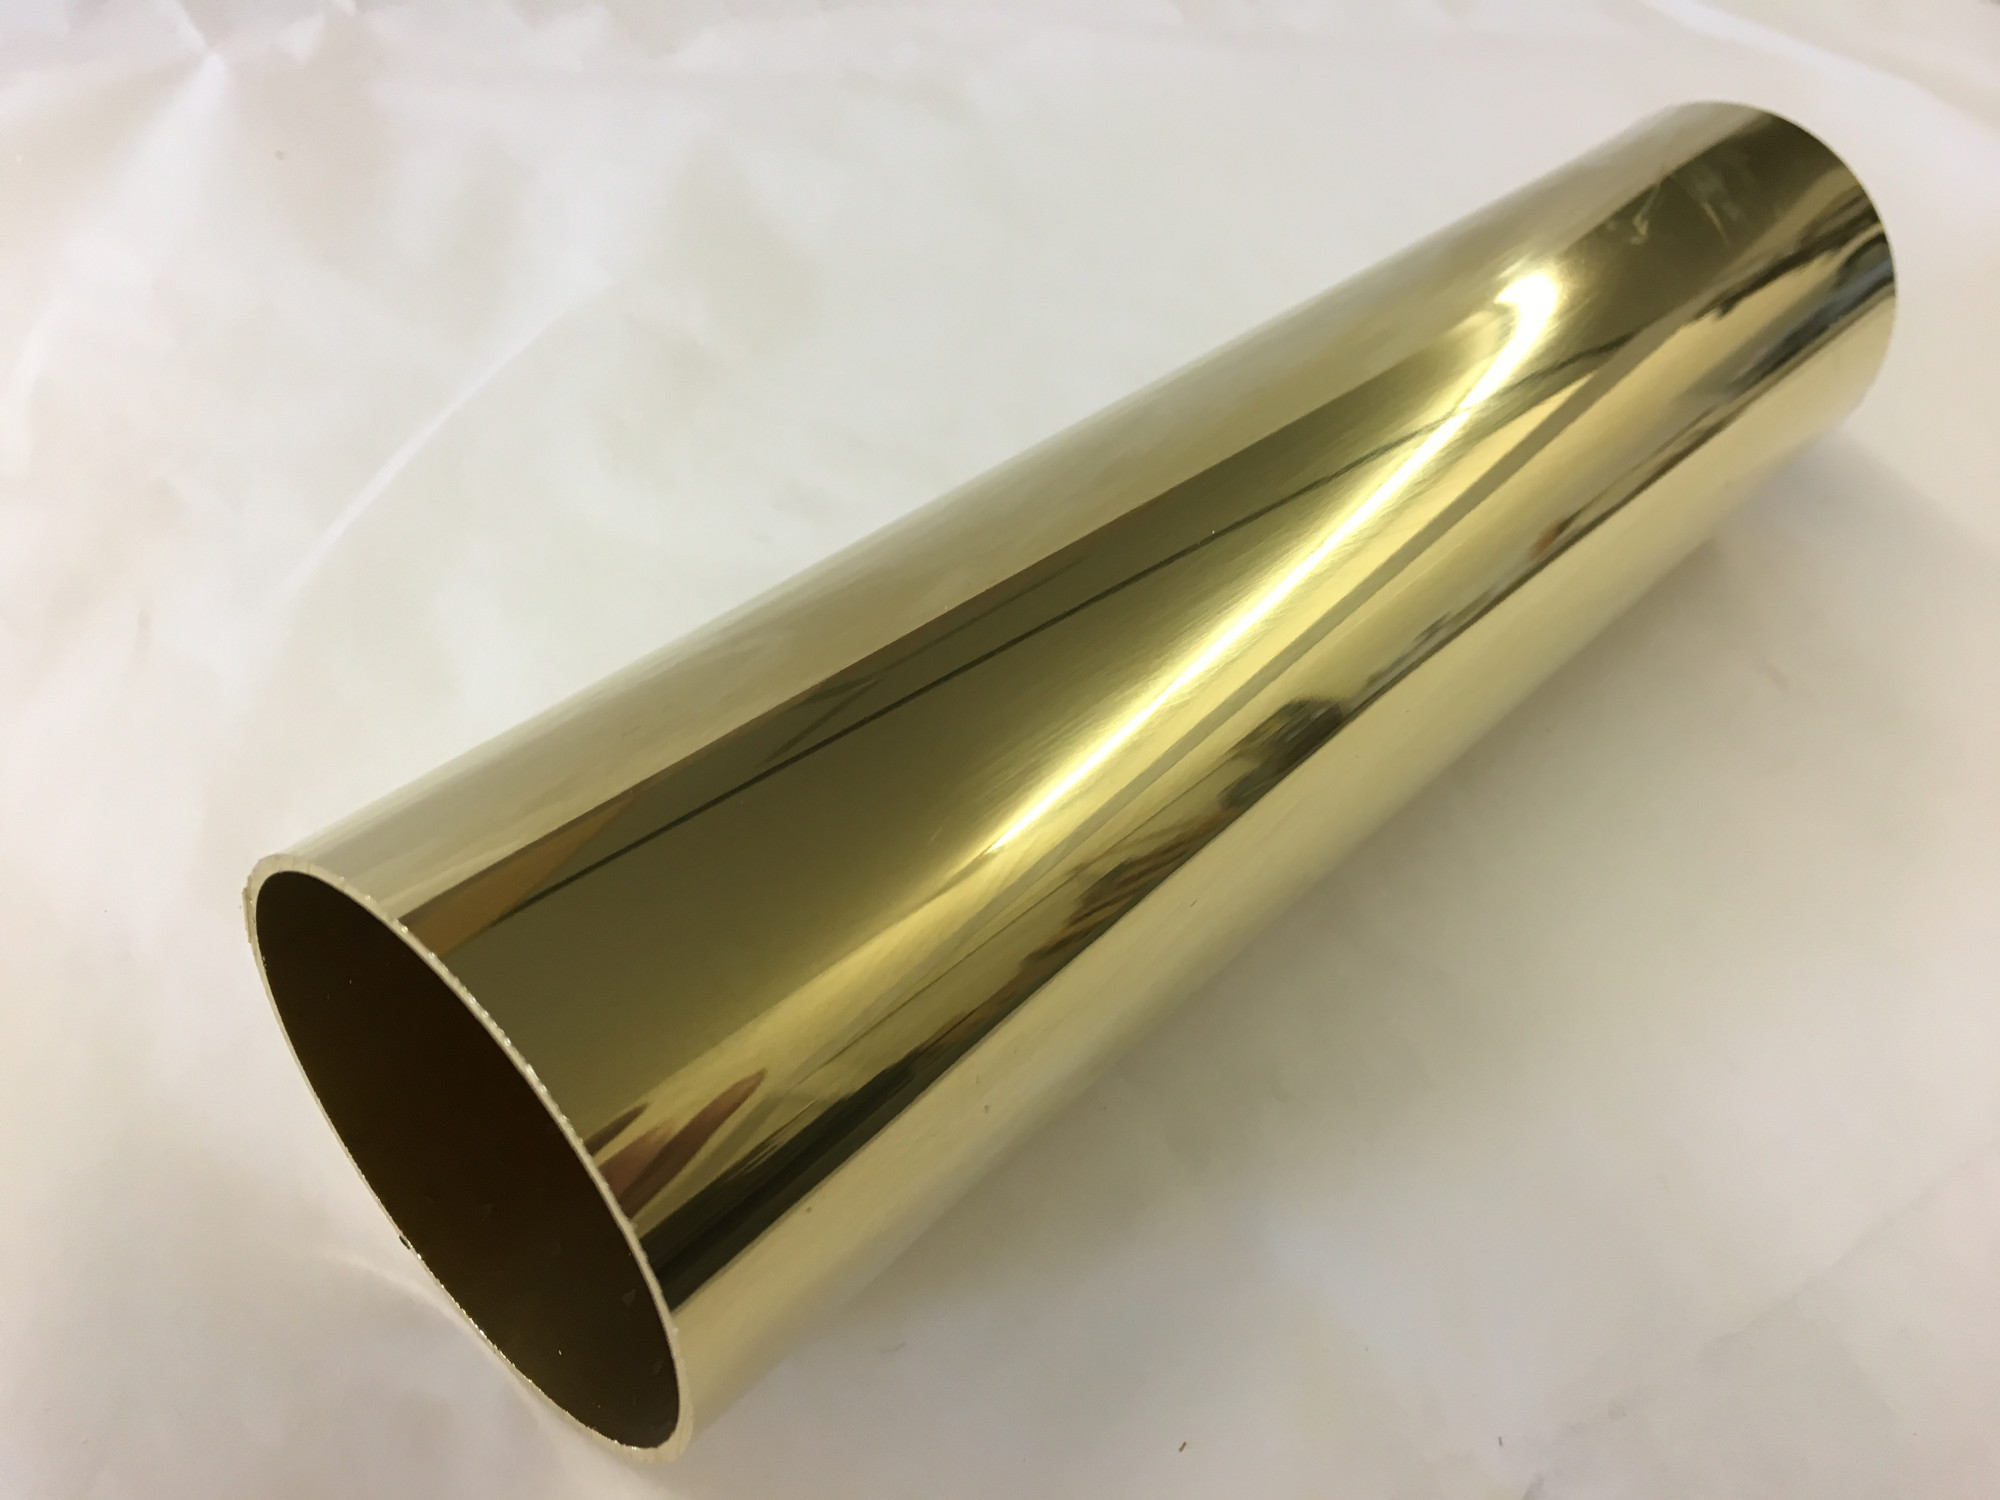 Polished Brass Round Tubing (2 Inches)